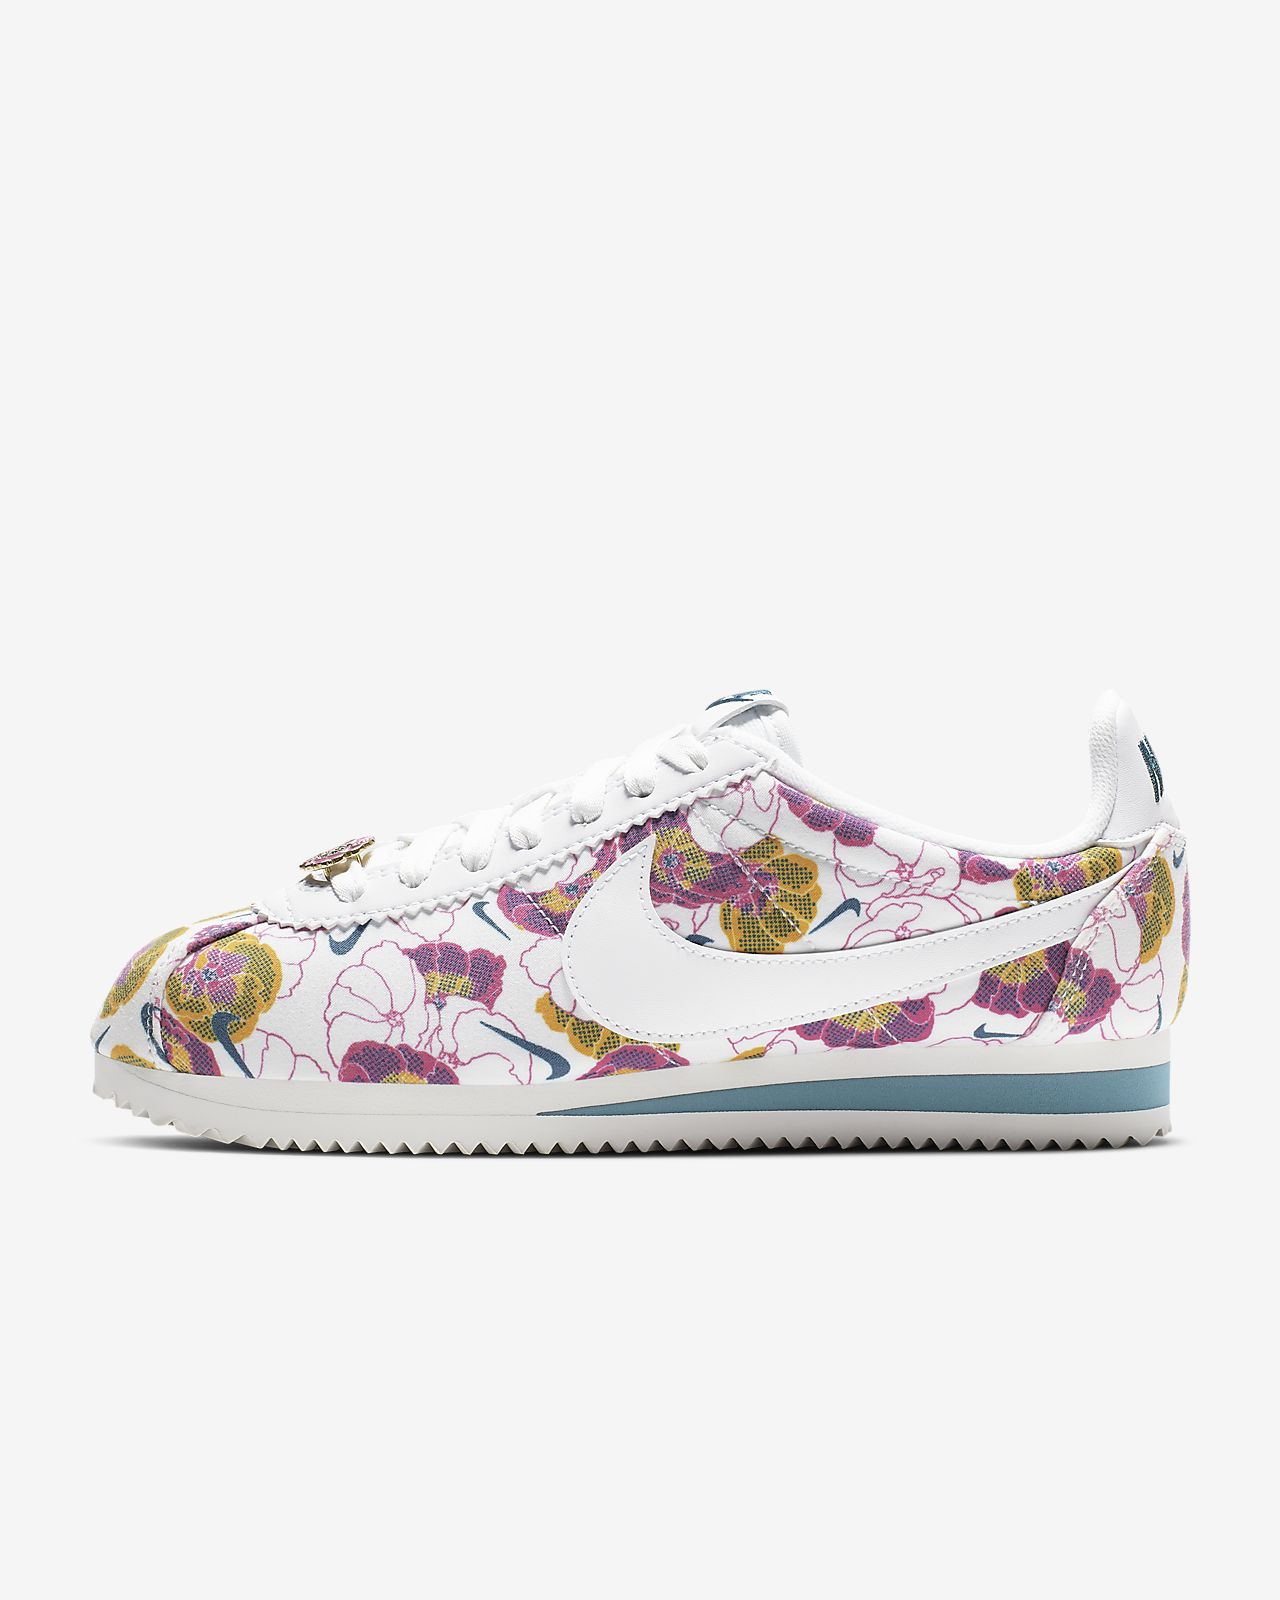 nike womens floral shoes